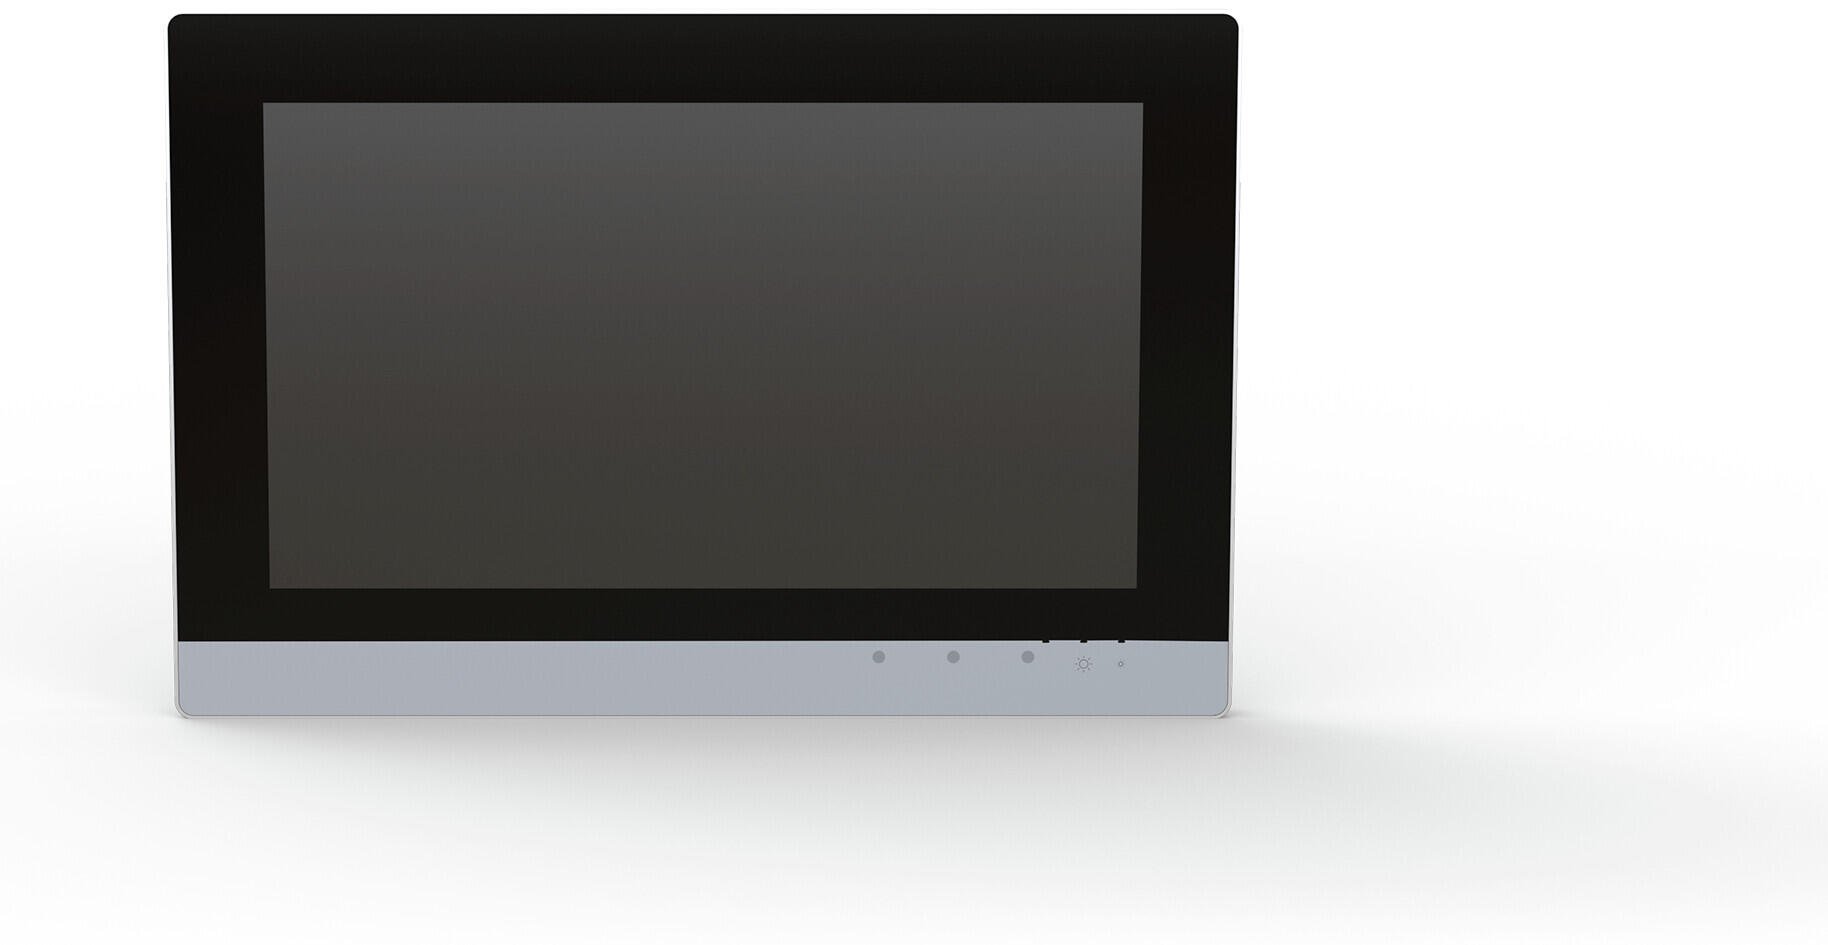 Touch Panel 600; 39.6 cm (15,6"); 1920 x 1080 pixlar; 2 x ETHERNET, 2 x USB, CAN, DI/DO, RS-232/485, Audio; Control Panel